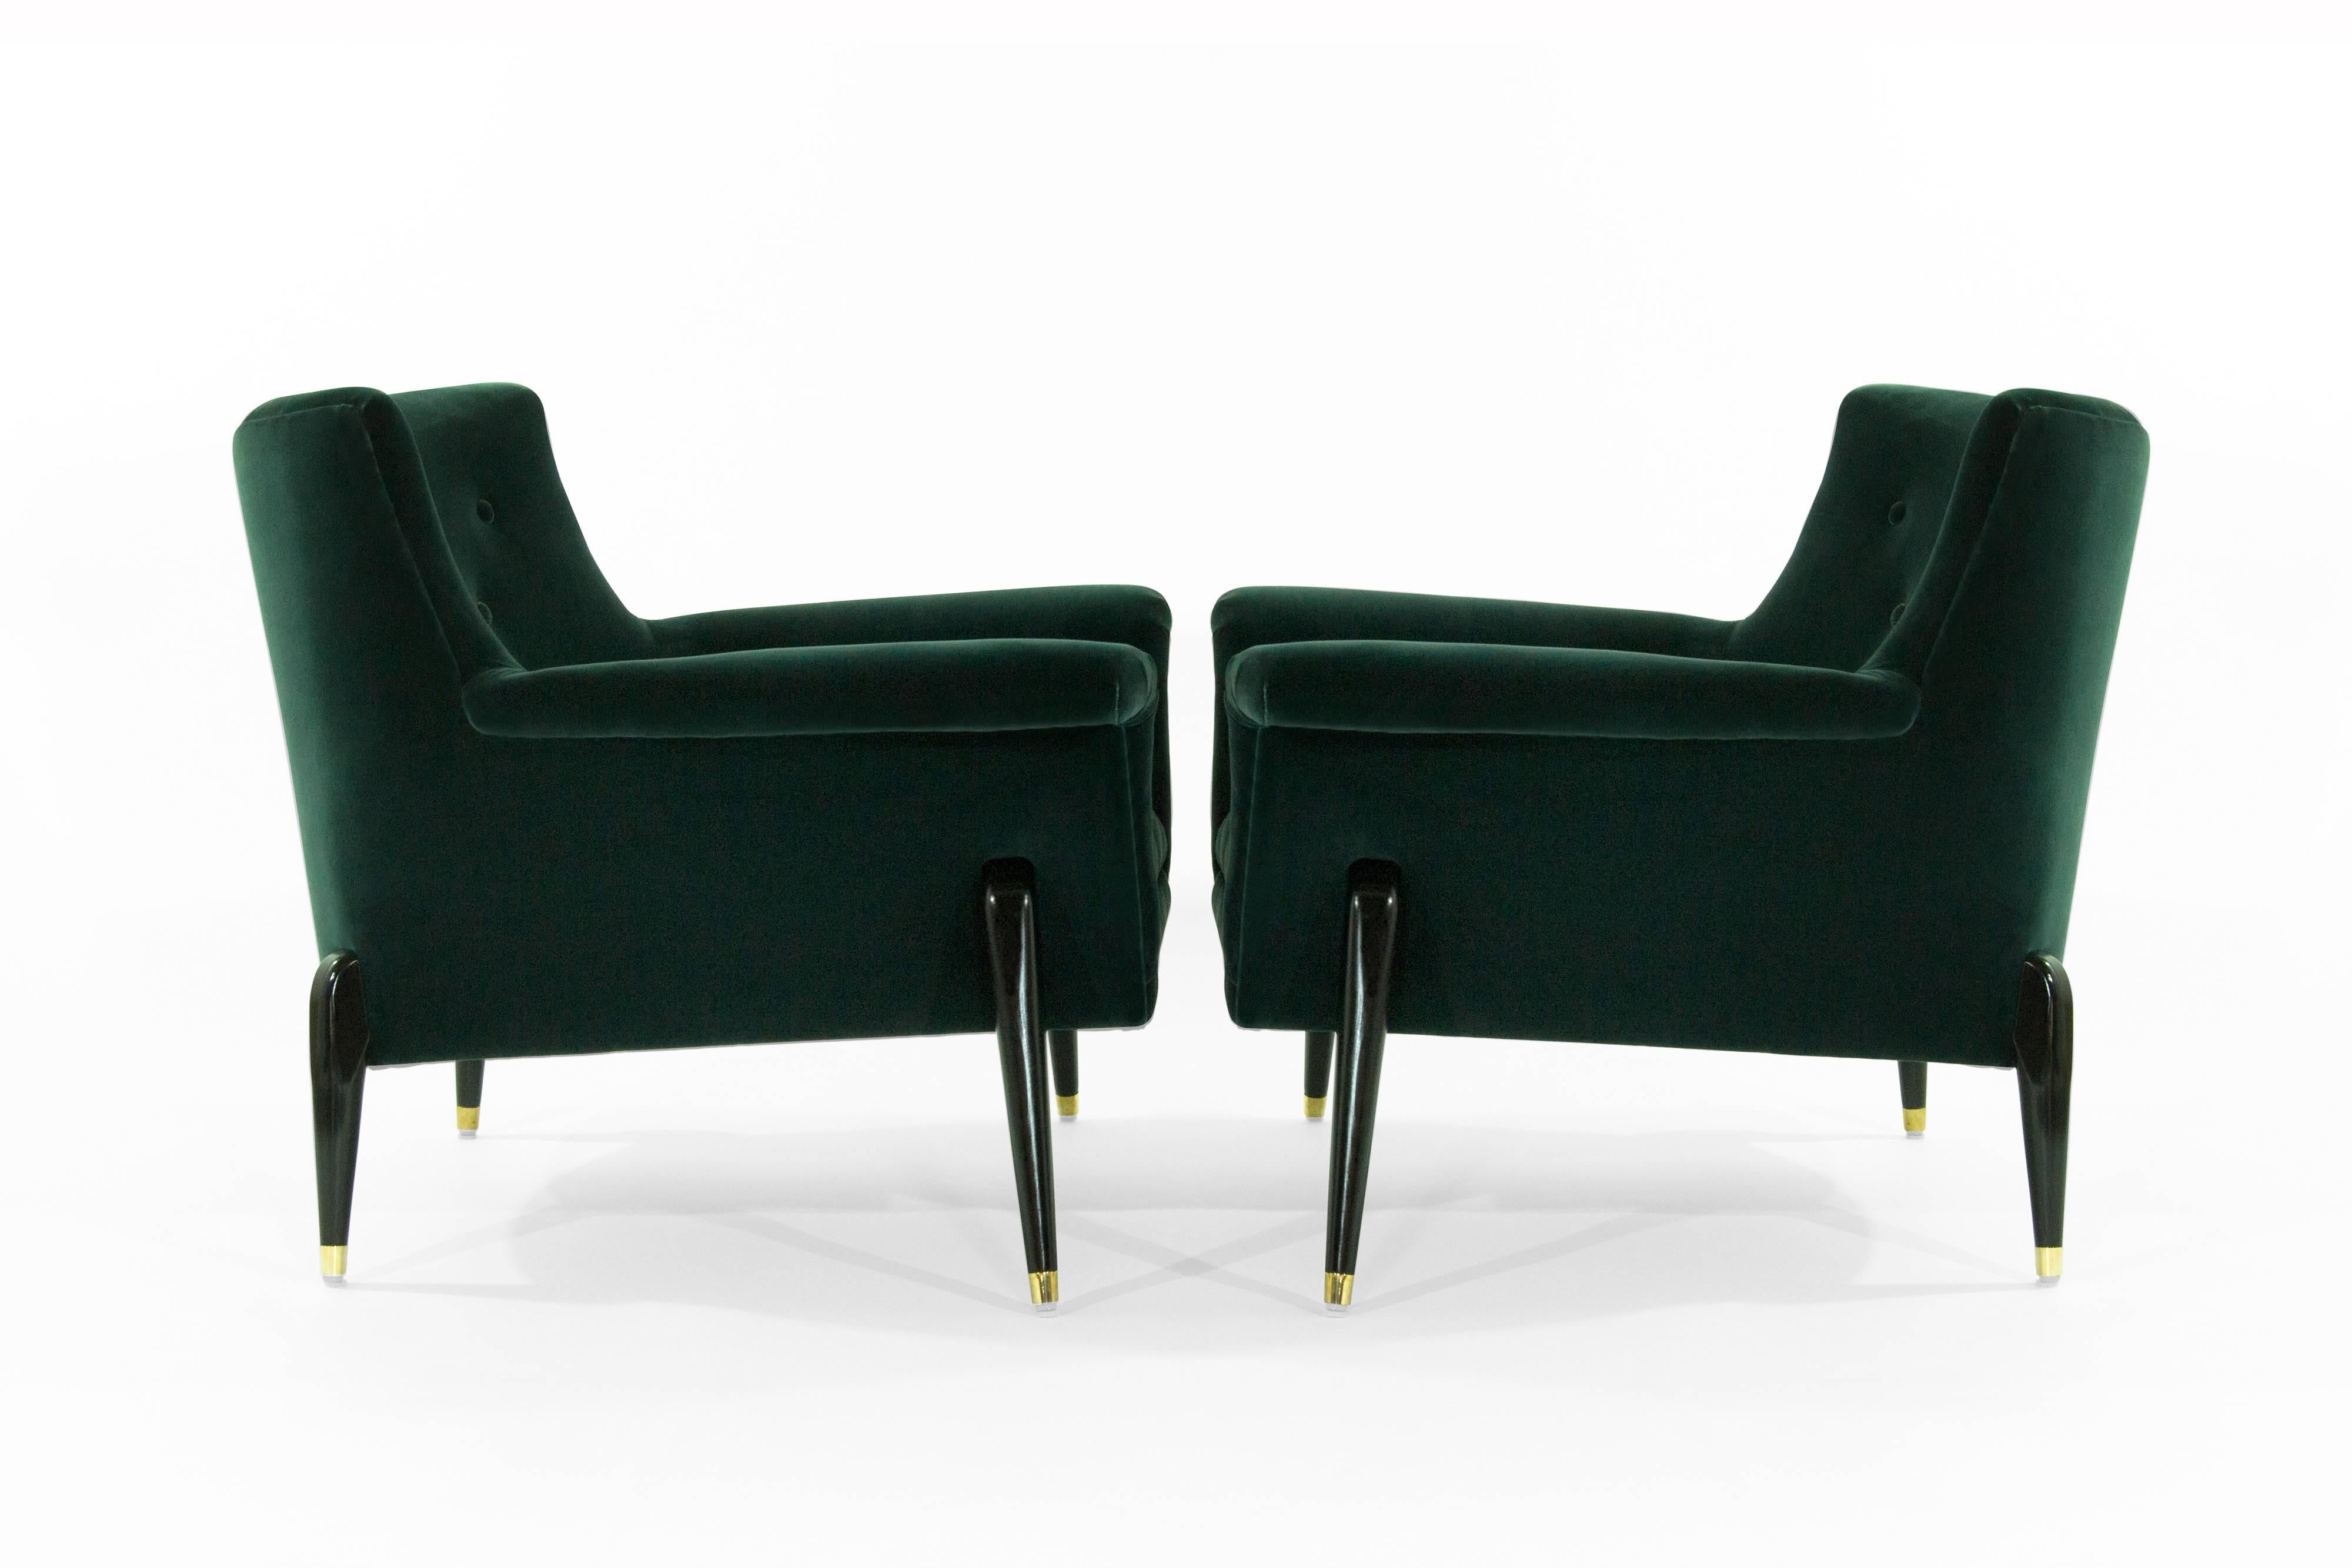 Pair of significant Italian spider leg lounge chairs in the style of Ico Parisi or Jean Royére, all of the exposed wooden legs are ebonized in black polished with brass sabots, the chairs have been recently reupholstered in a high-quality tourmaline